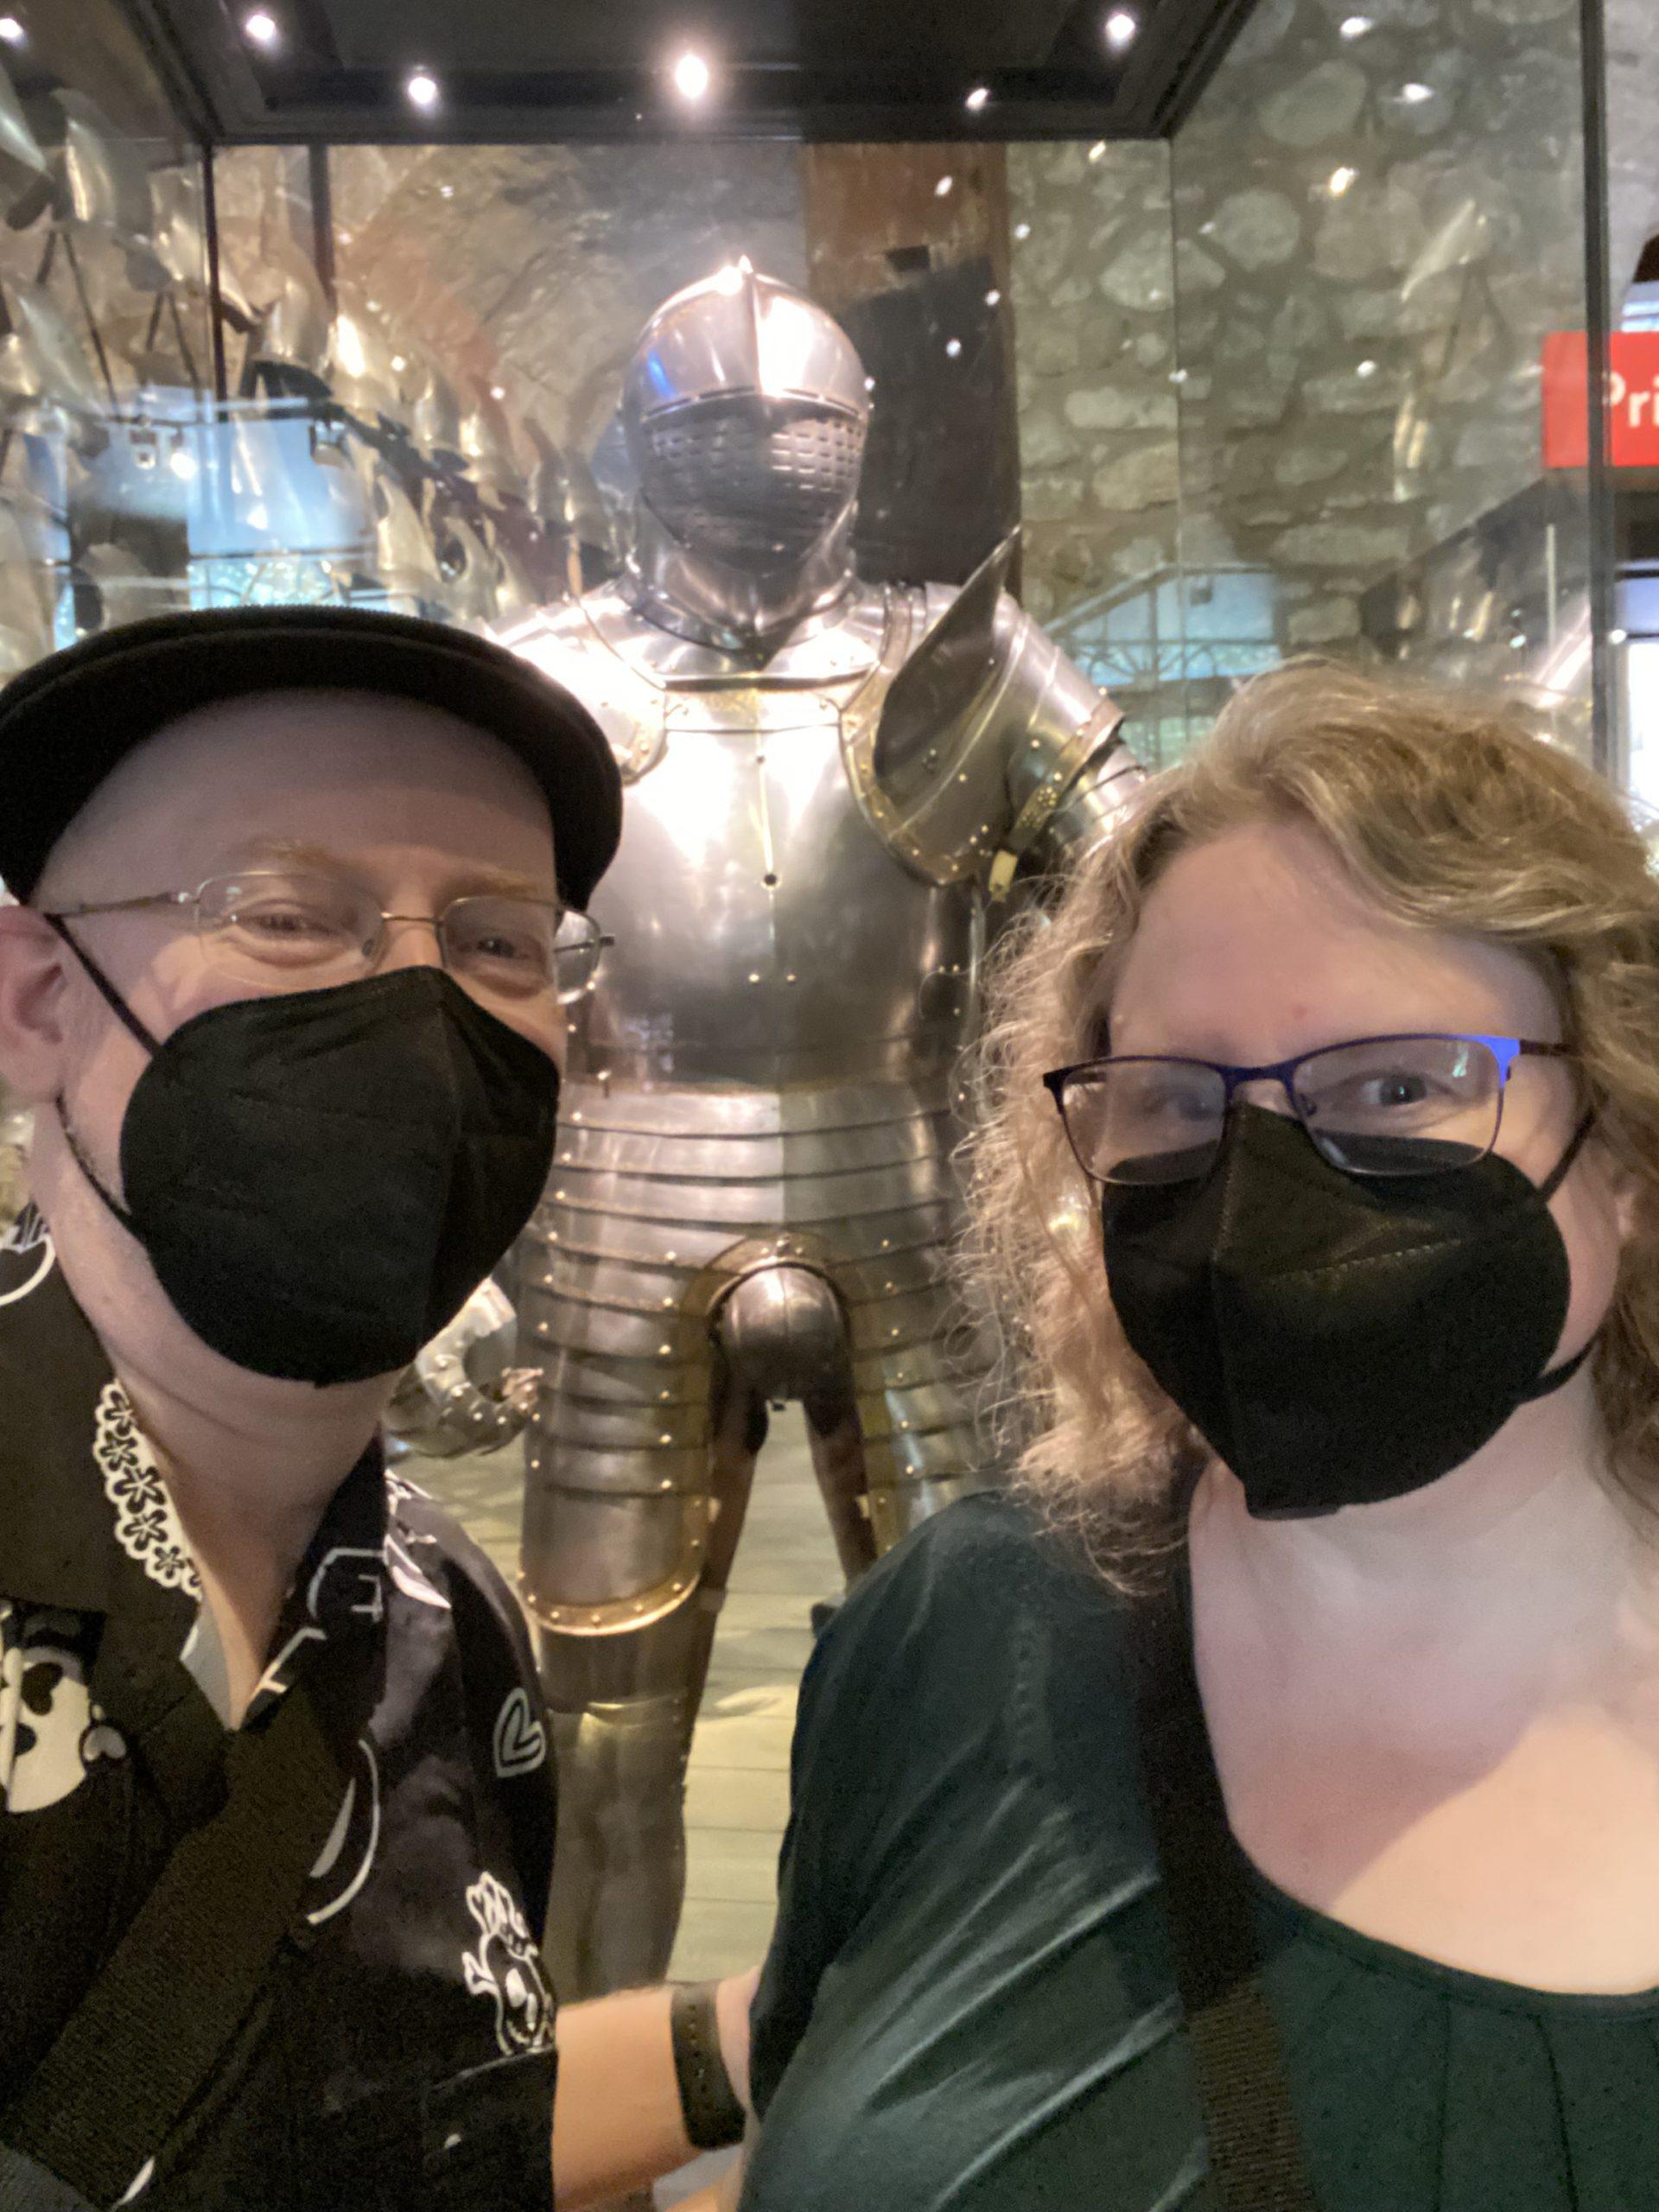 Us in front of one of King Henry VIII's suits of armor; this one has a very noticeable codpiece.